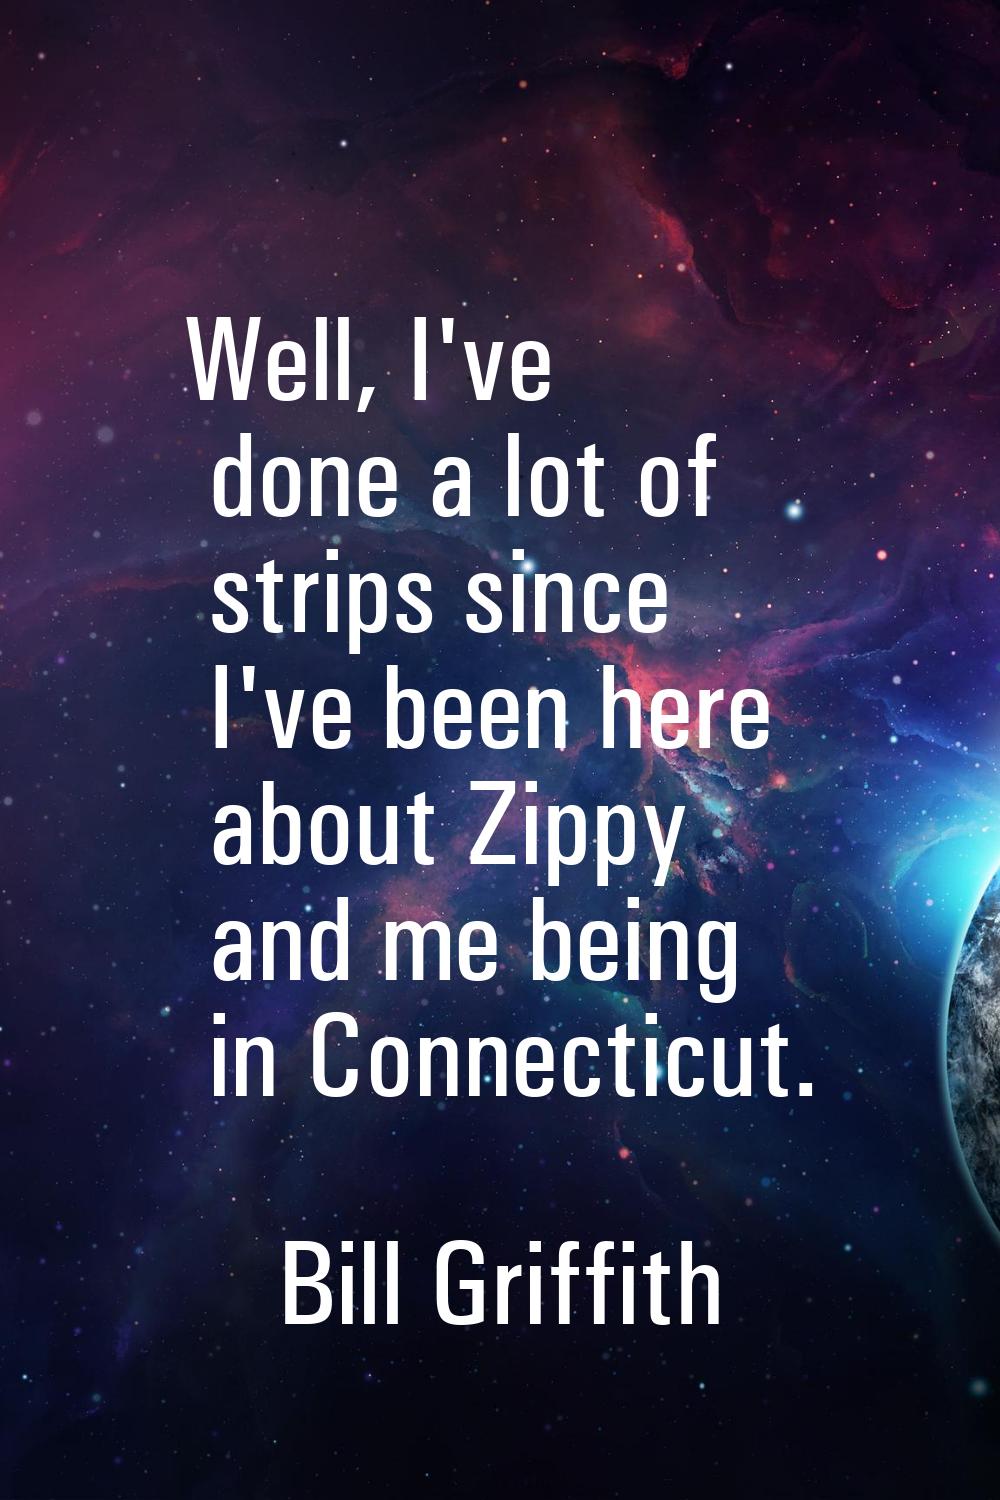 Well, I've done a lot of strips since I've been here about Zippy and me being in Connecticut.